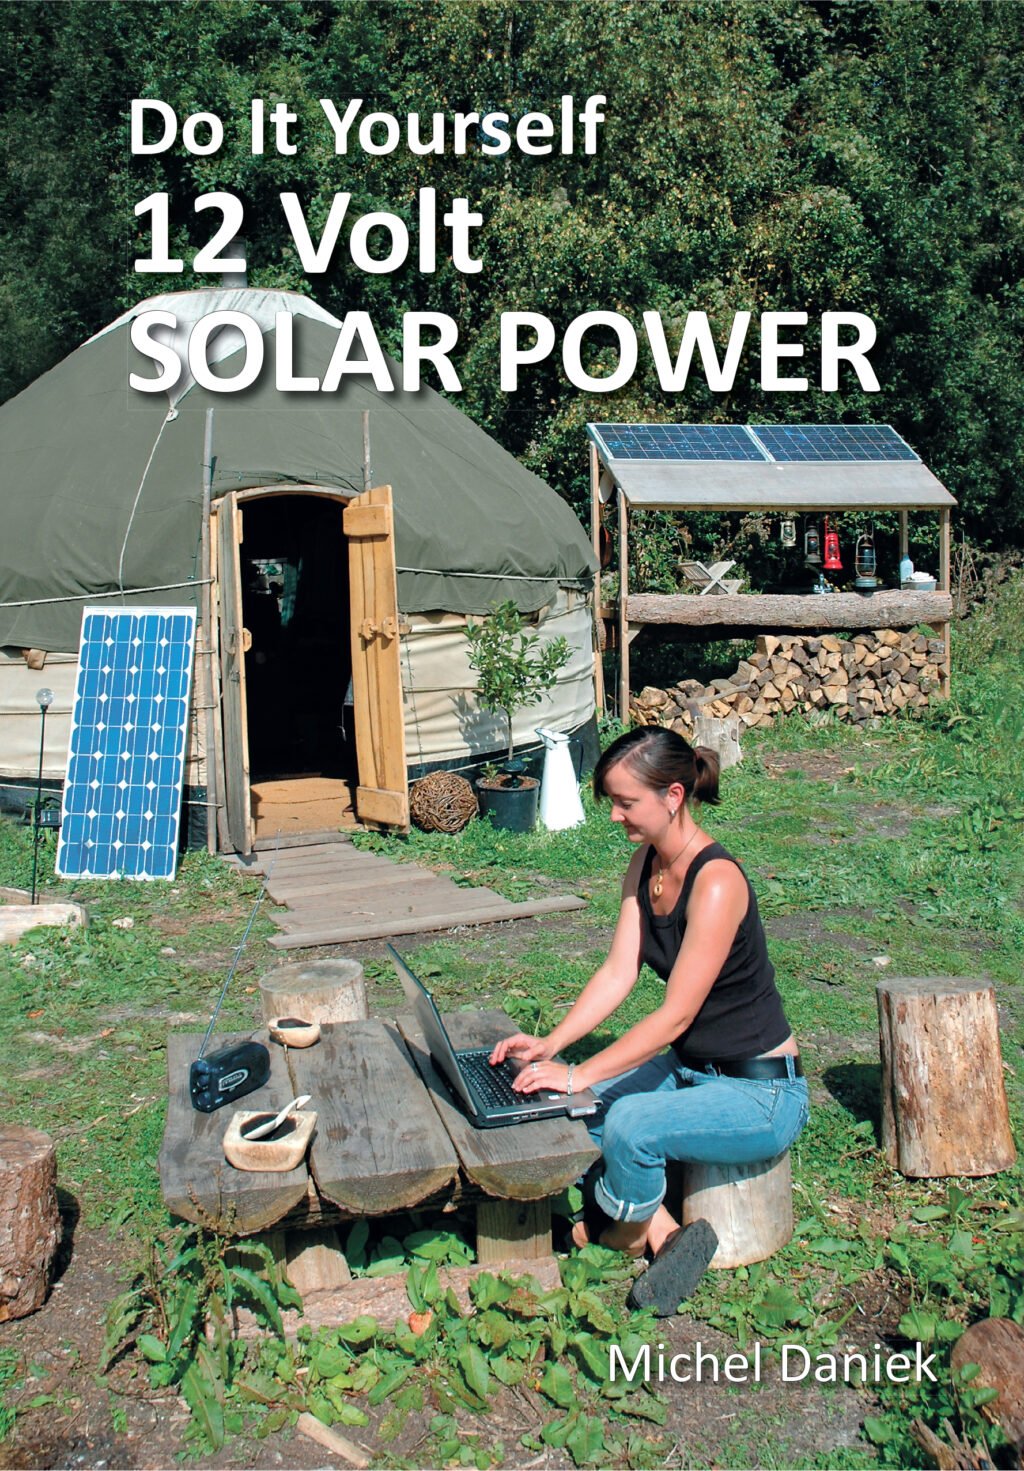 The Do It Yourself 12 Volt Solar Power